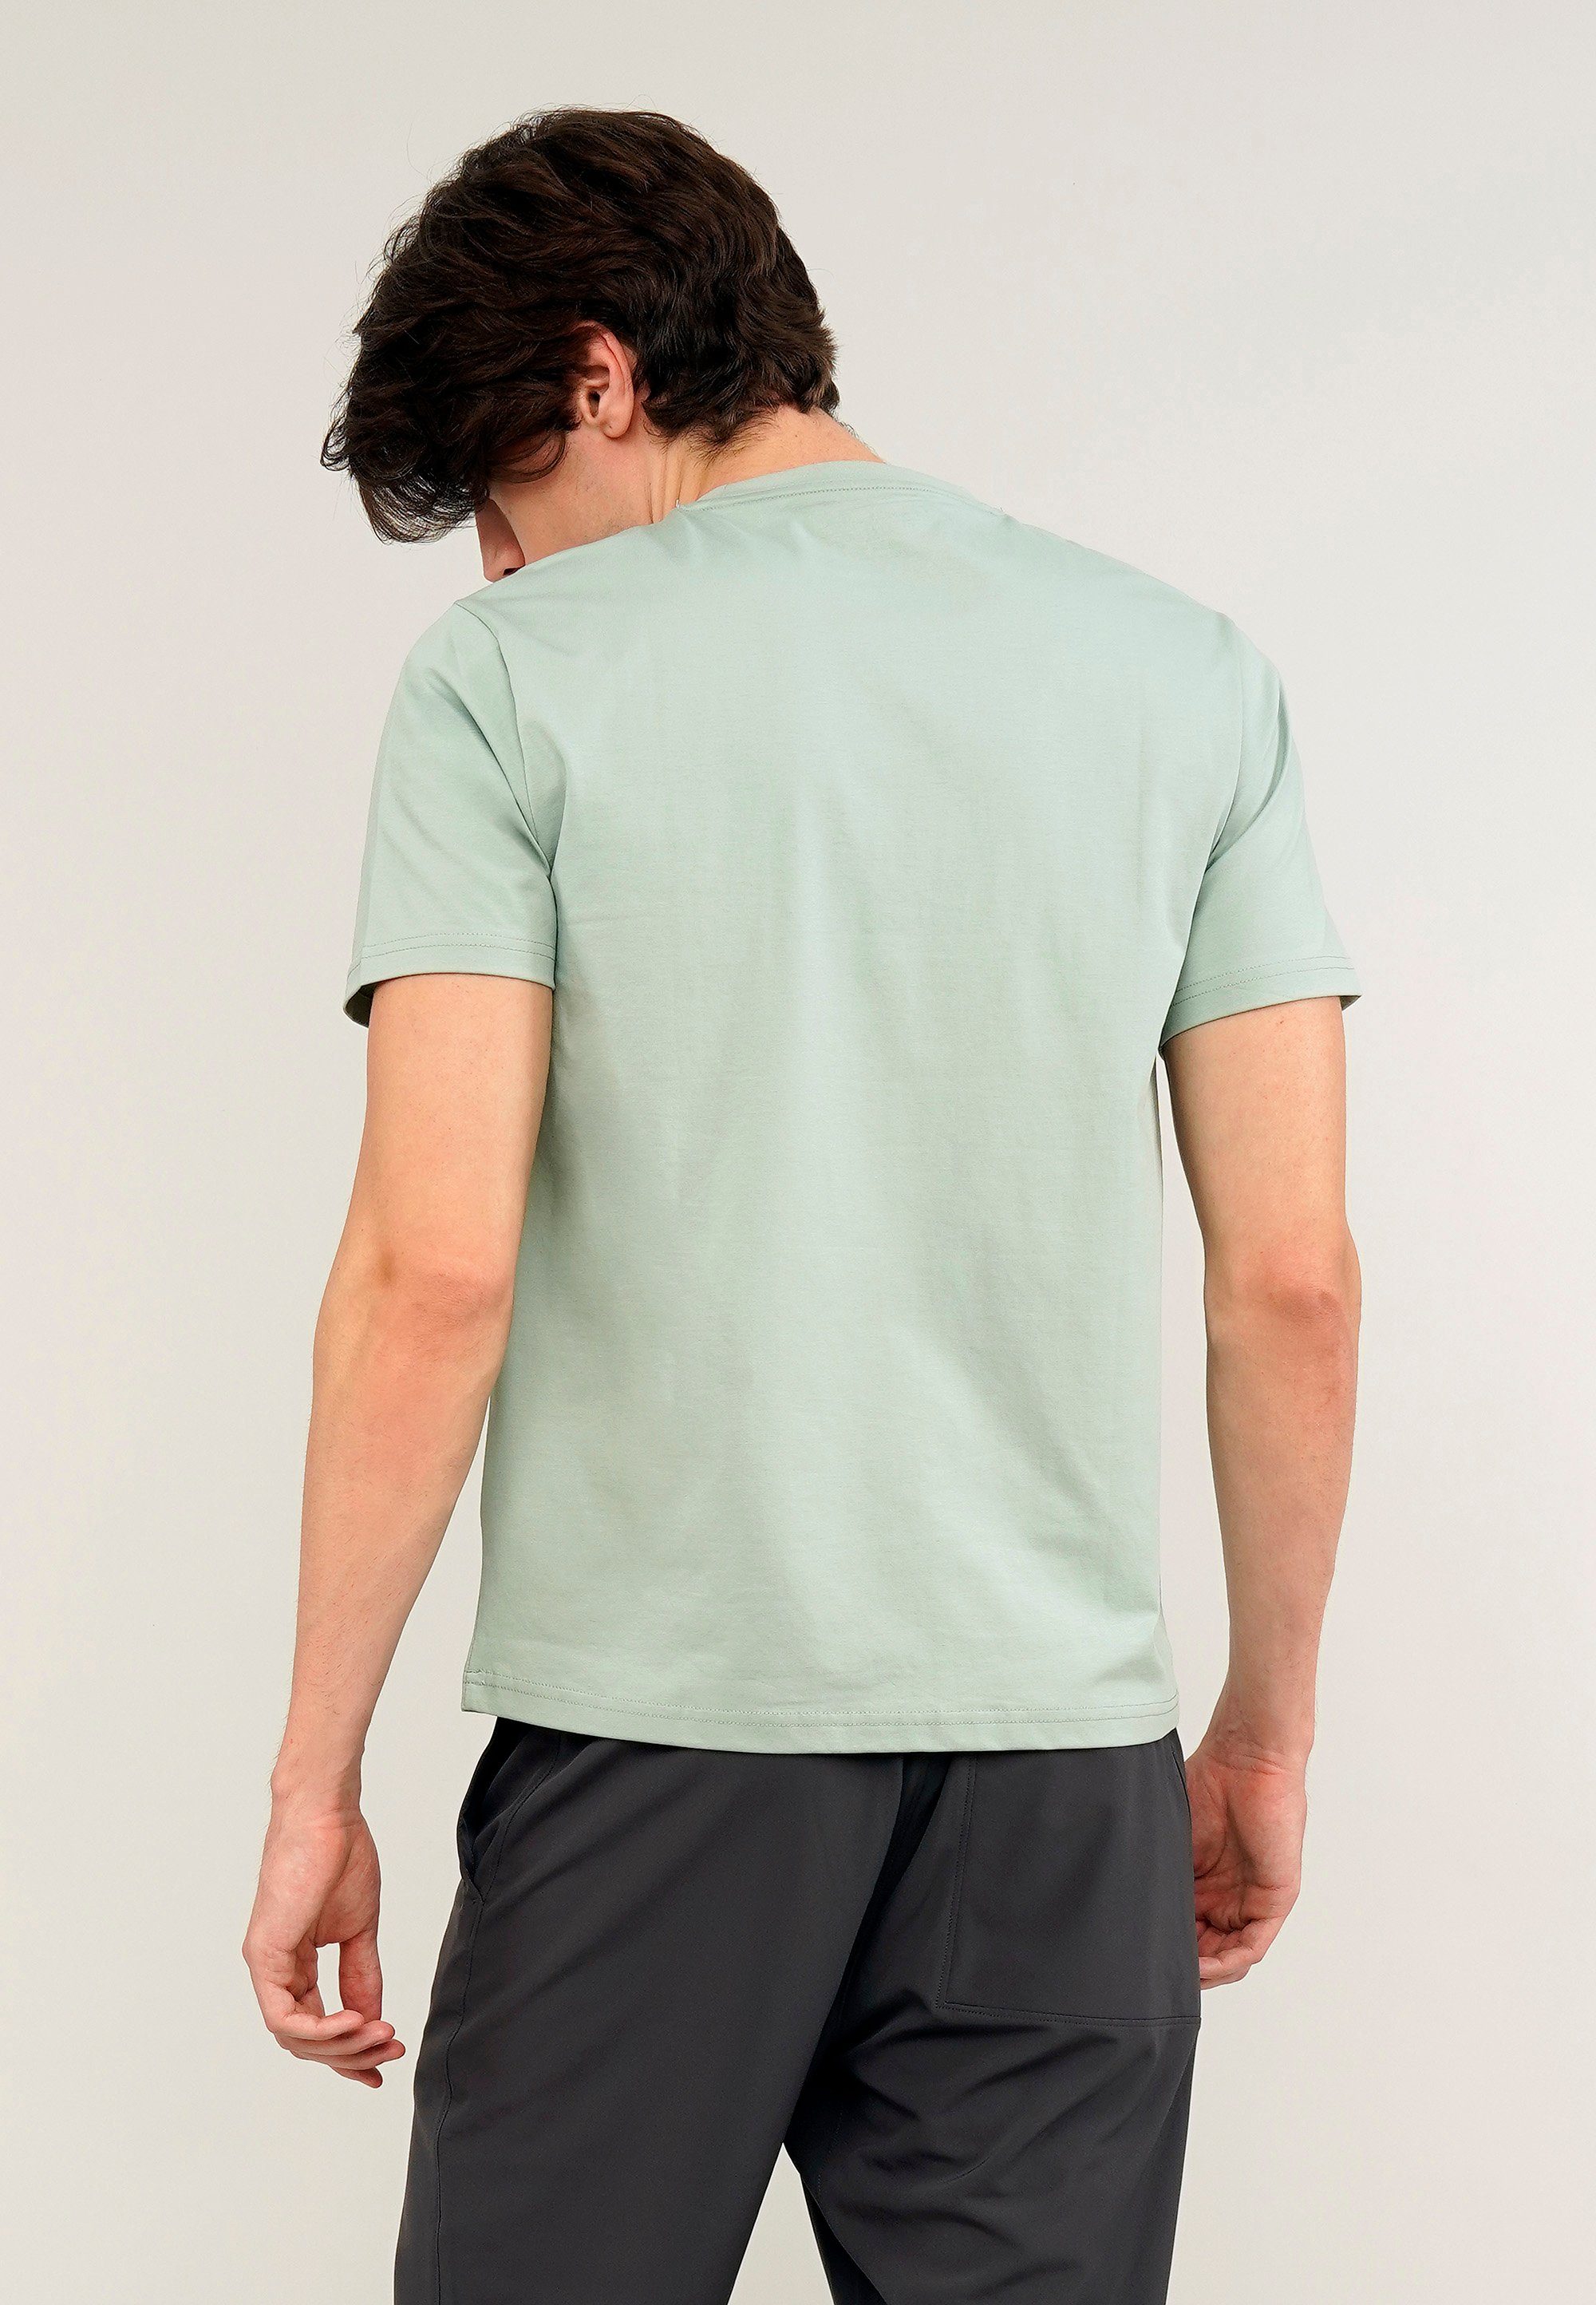 mint mit Cool-Touch-Funktion Funktionsshirt Sorena angenehmer GIORDANO